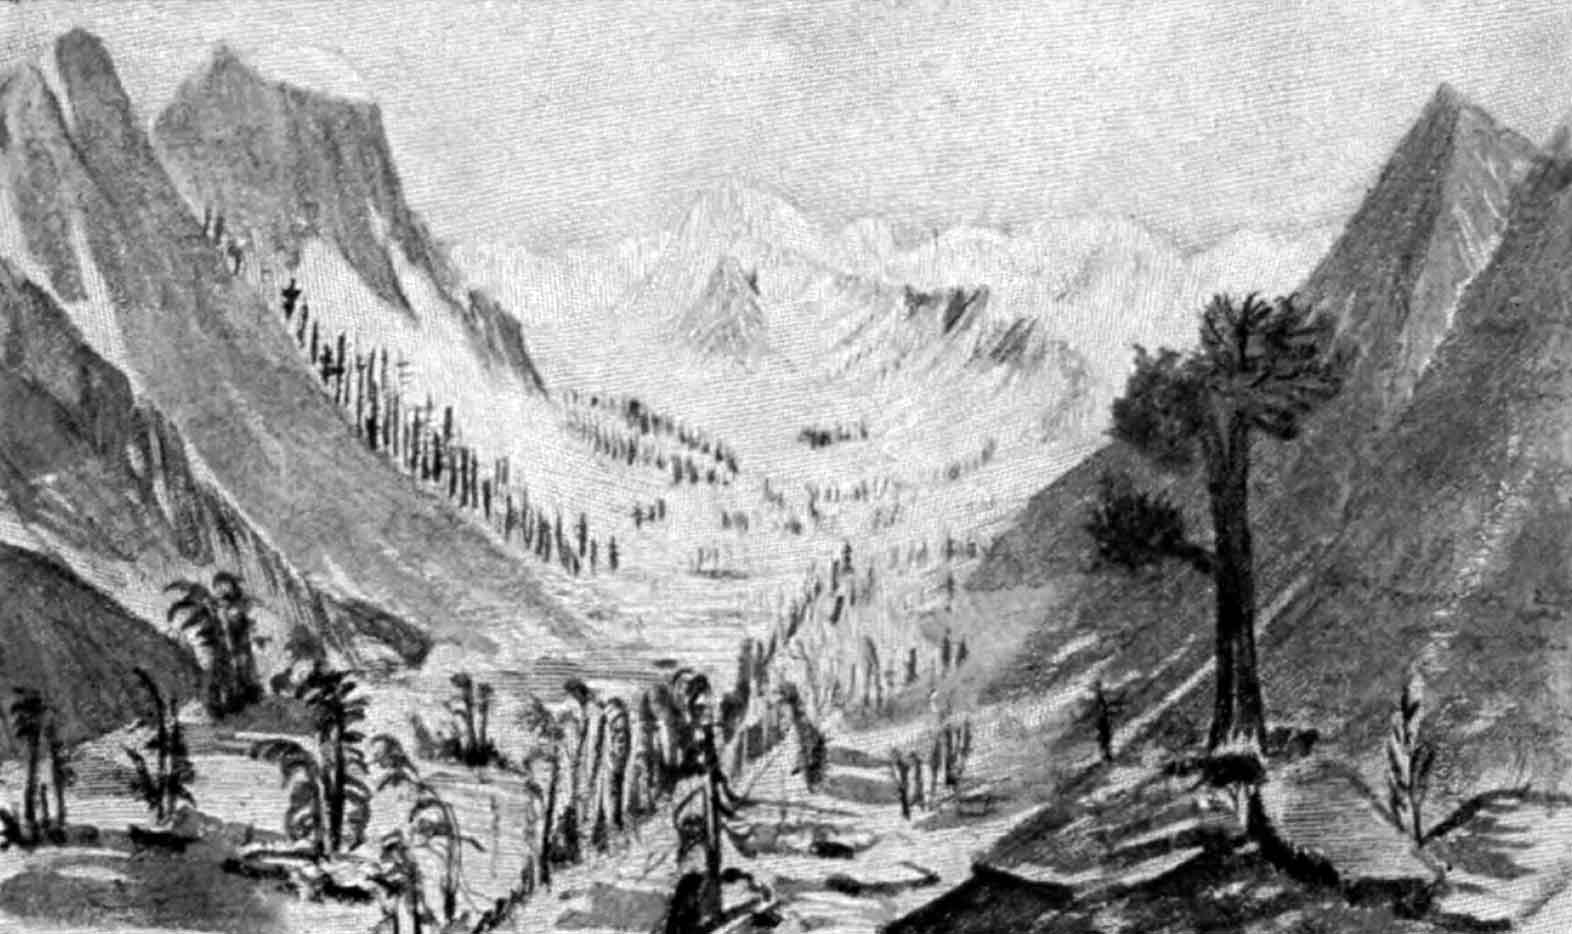 A drawing of a glacial valley with high peaks on either side of a long canyon. In the foreground, there are a few patches of trees. In the distance, the higher mountain ranges are snow-covered.